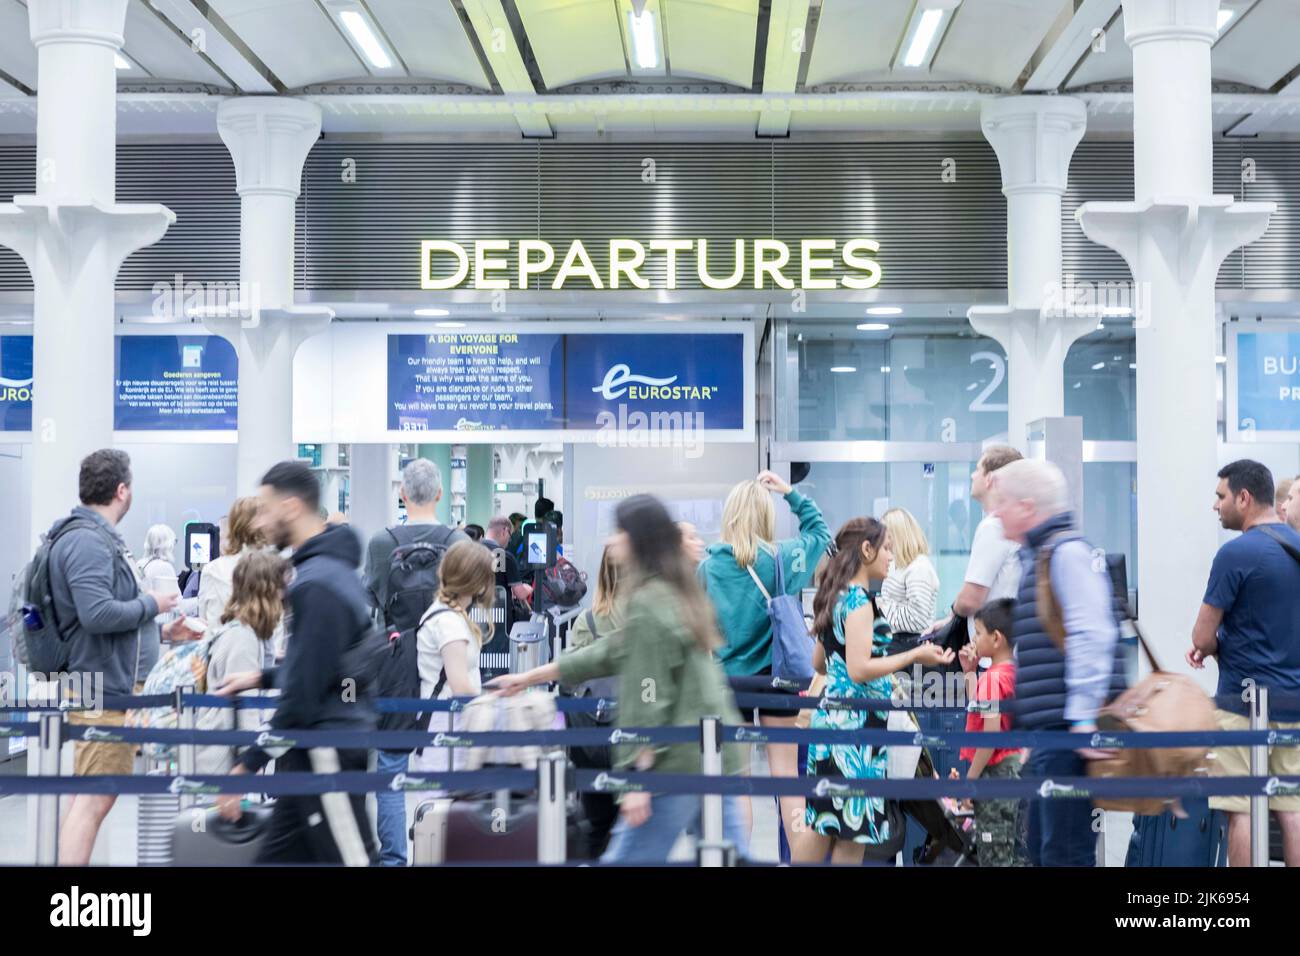 King’s Cross St. Pancras is seen to be busy this morning. Long queues form at the departure gate for Eurostar.  Image shot on 26th July 2022.  © Belin Stock Photo